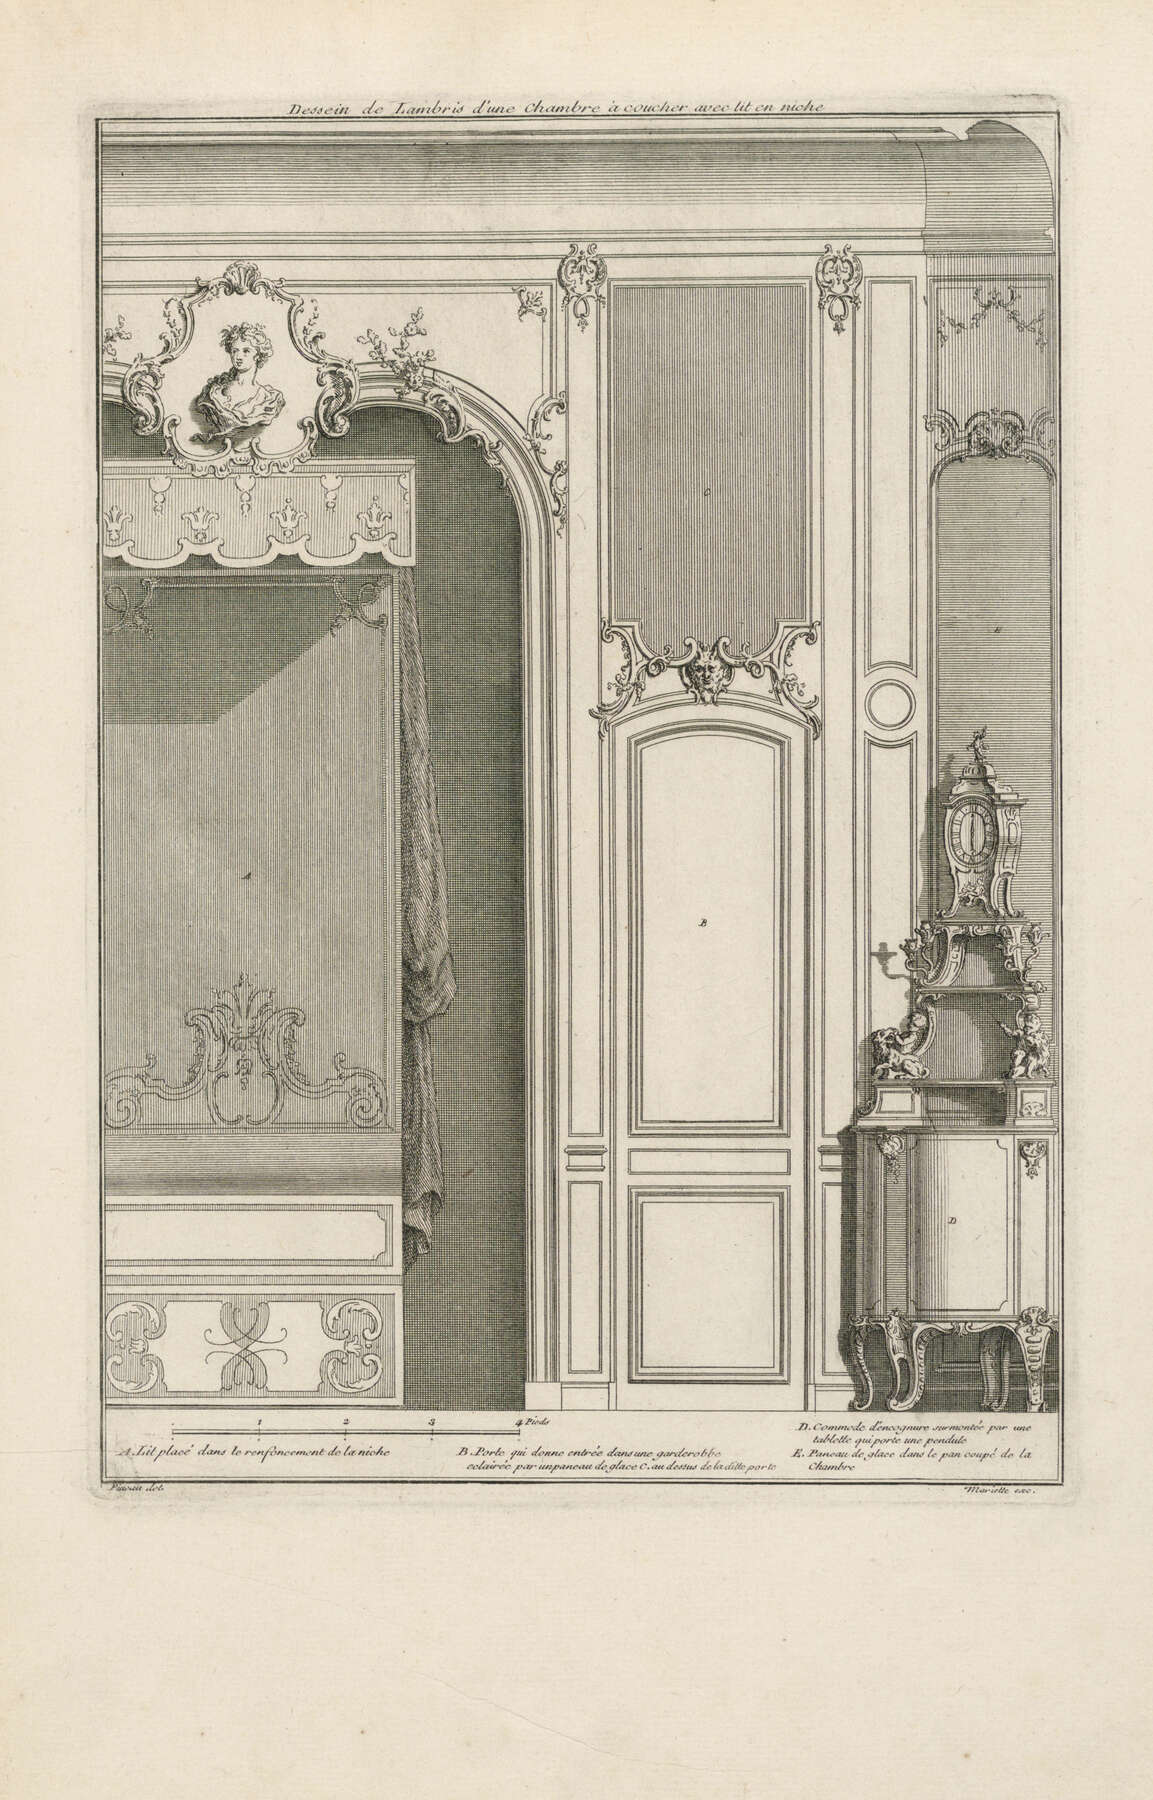 black, white, and gray engraving of an ornate French sleeping chamber with a corner cabinet depicted in the lower right-hand corner